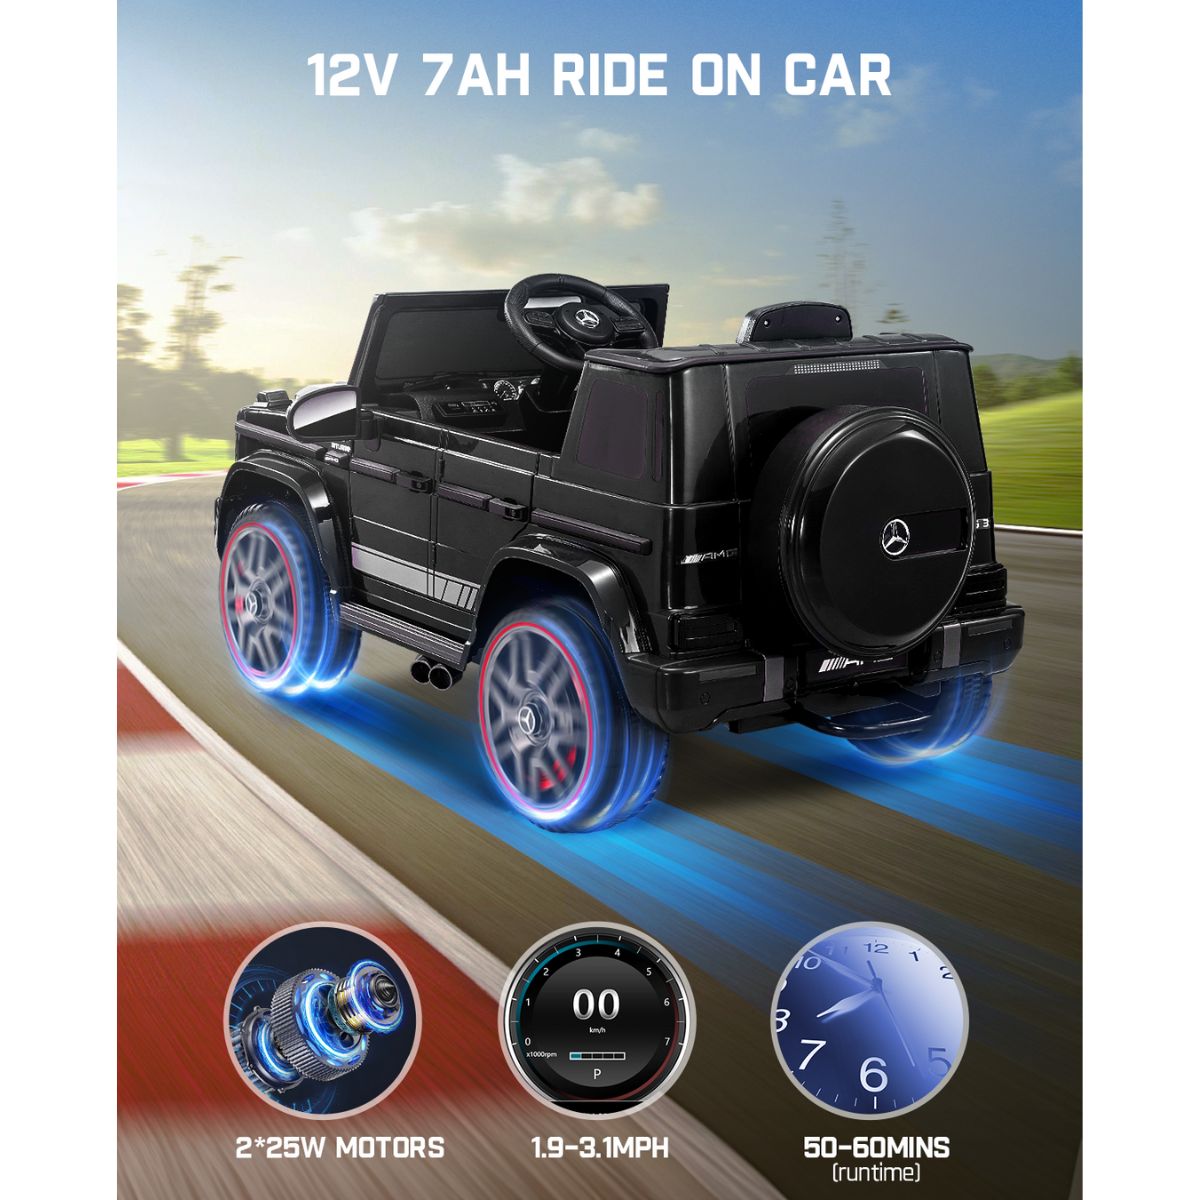 12V 10Ah Plus Size Licensed Ride on Car for Kids Ages 3-7, Electric Vehicle Ride on Toys w/Parent Remote, Wireless Music, Suspension System, Ideal Gift to Kids-AMG G63 Max, Black